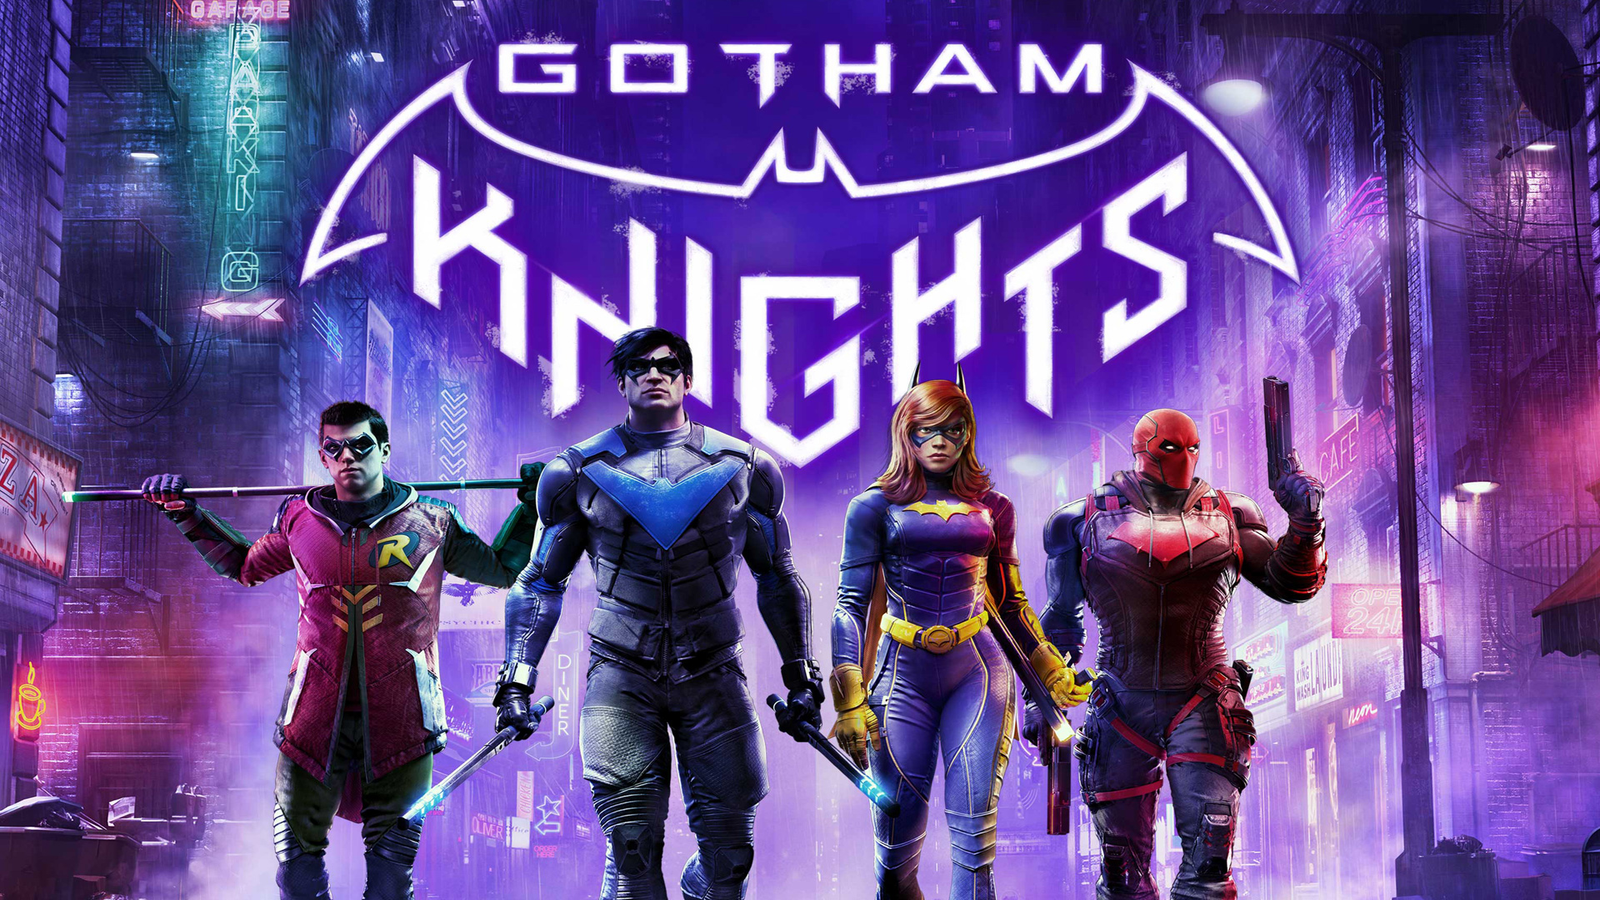 Gotham Knights Gets a New Story Trailer, But No New Release Date - IGN